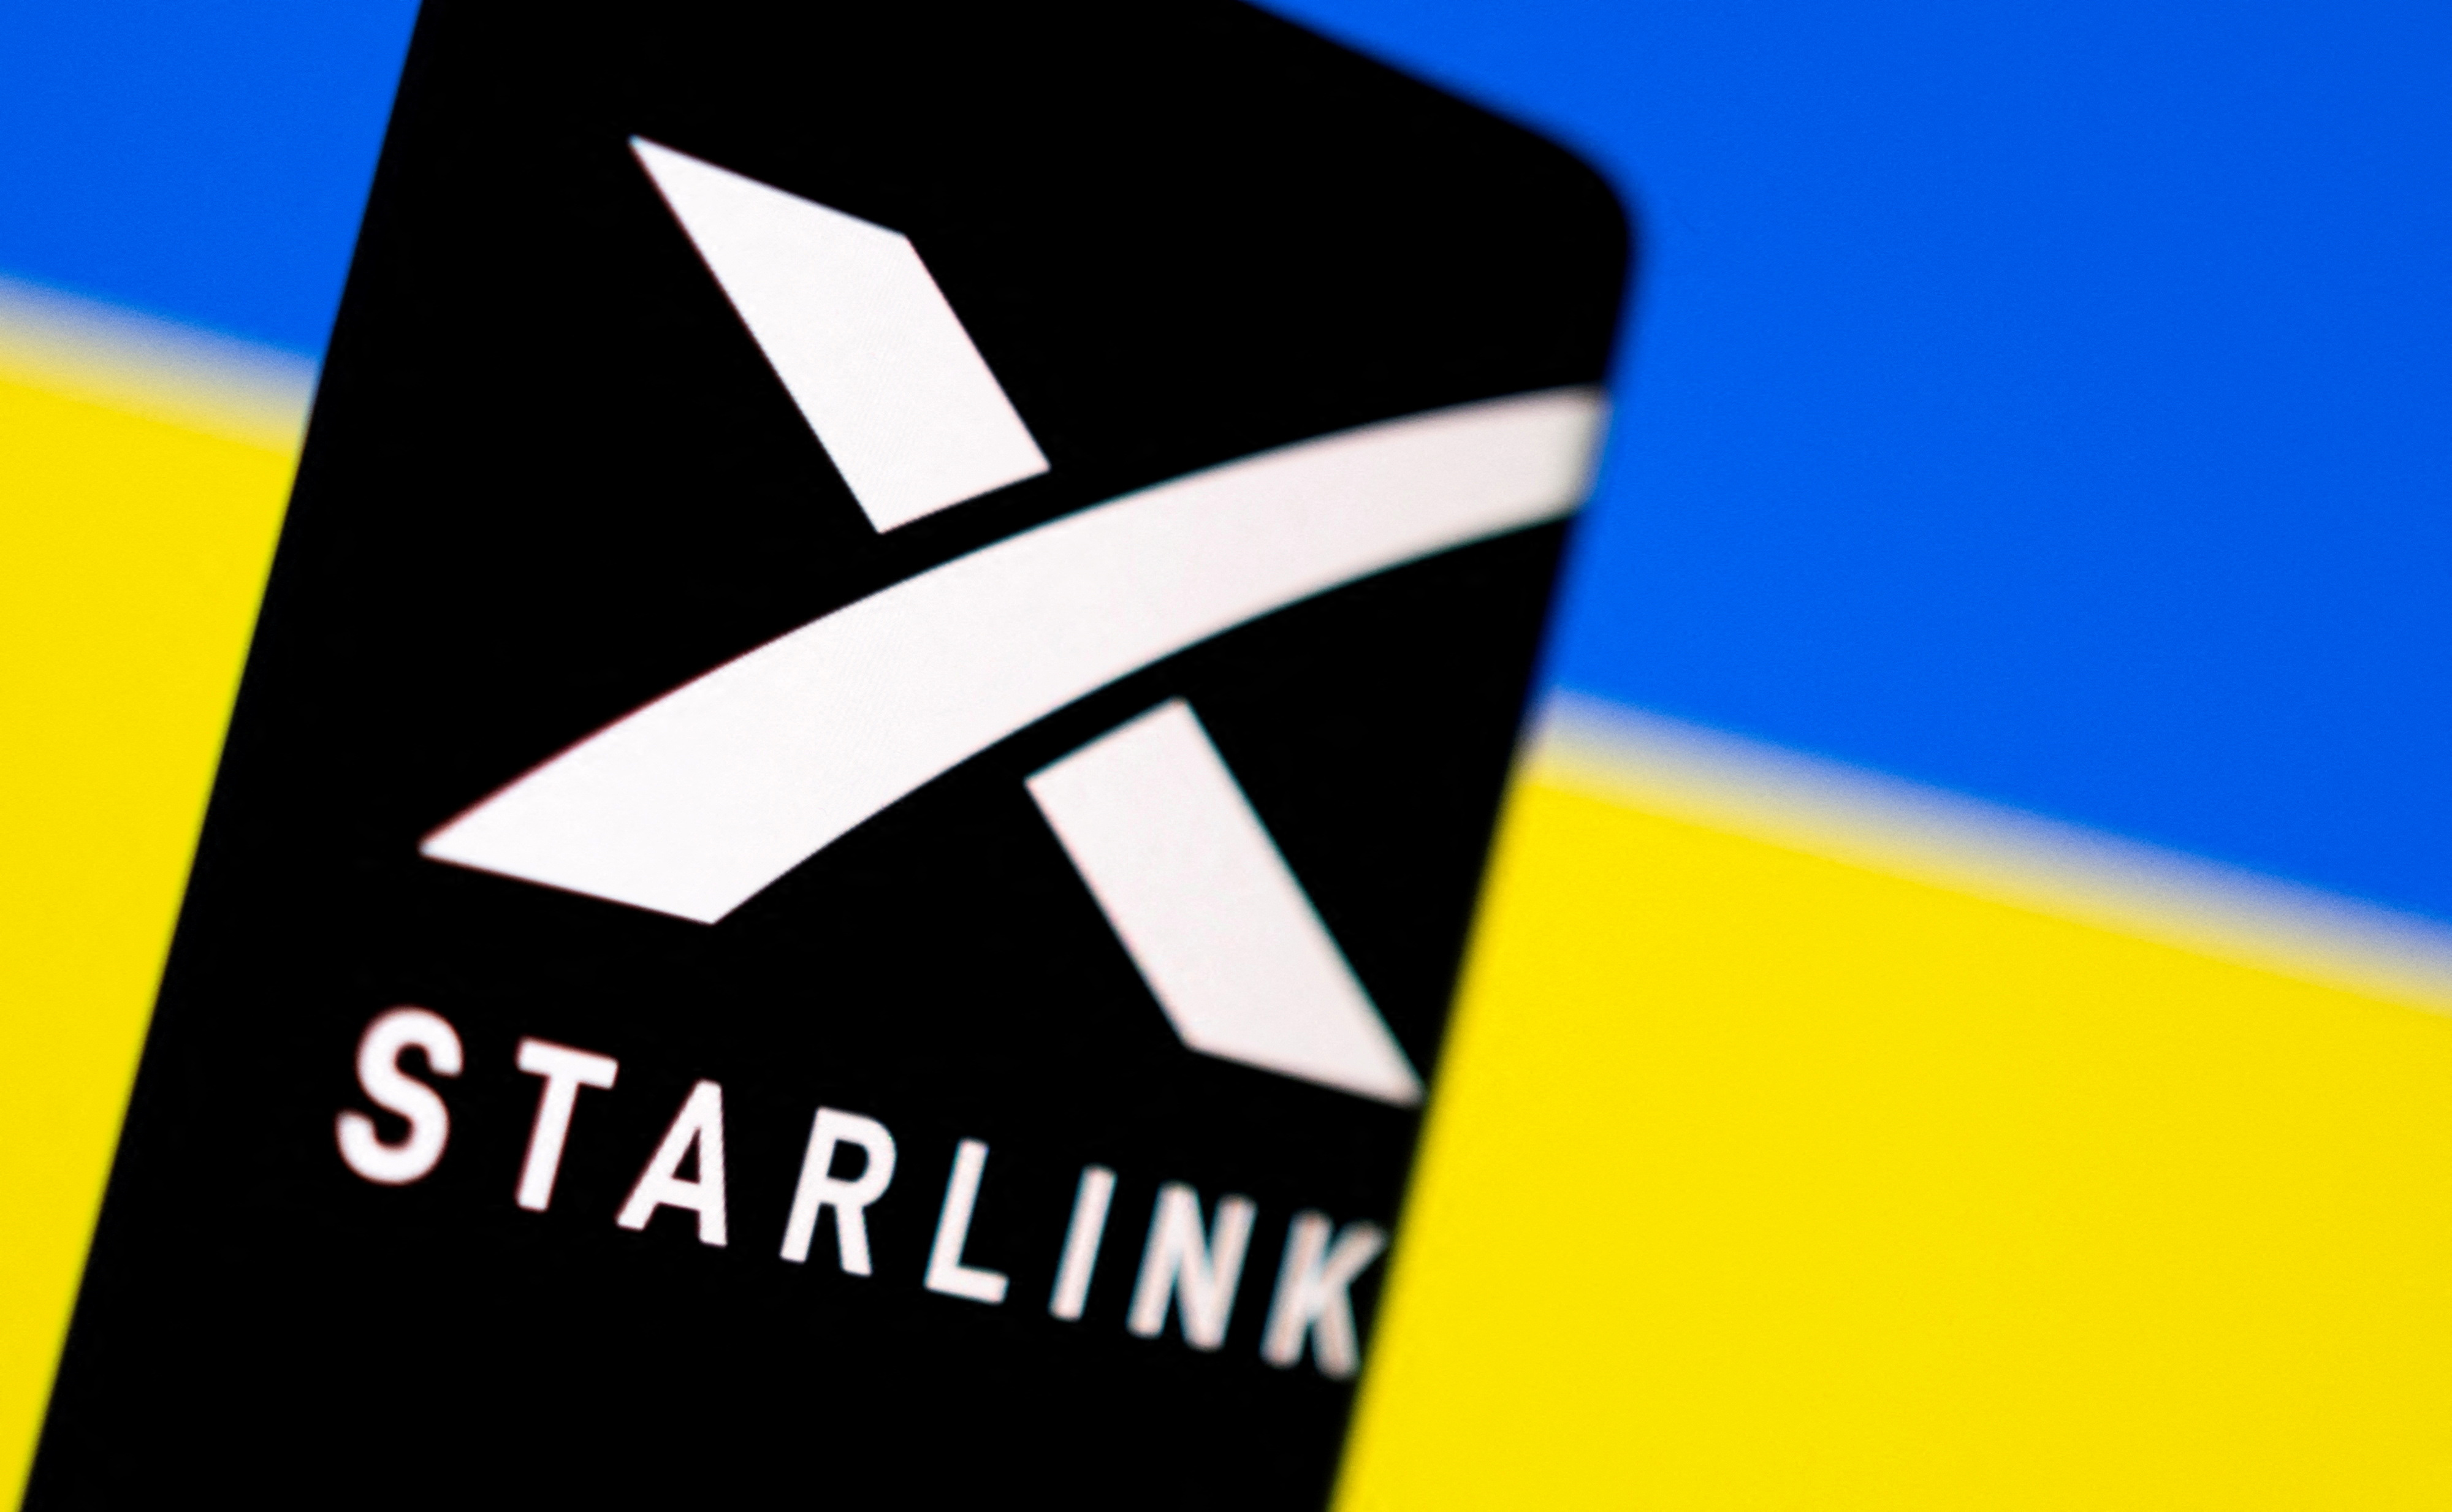 FILE PHOTO: Starlink logo is seen on a smartphone in front of displayed Ukrainian flag in this illustration taken February 27, 2022. REUTERS/Dado Ruvic/Illustration/File Photo